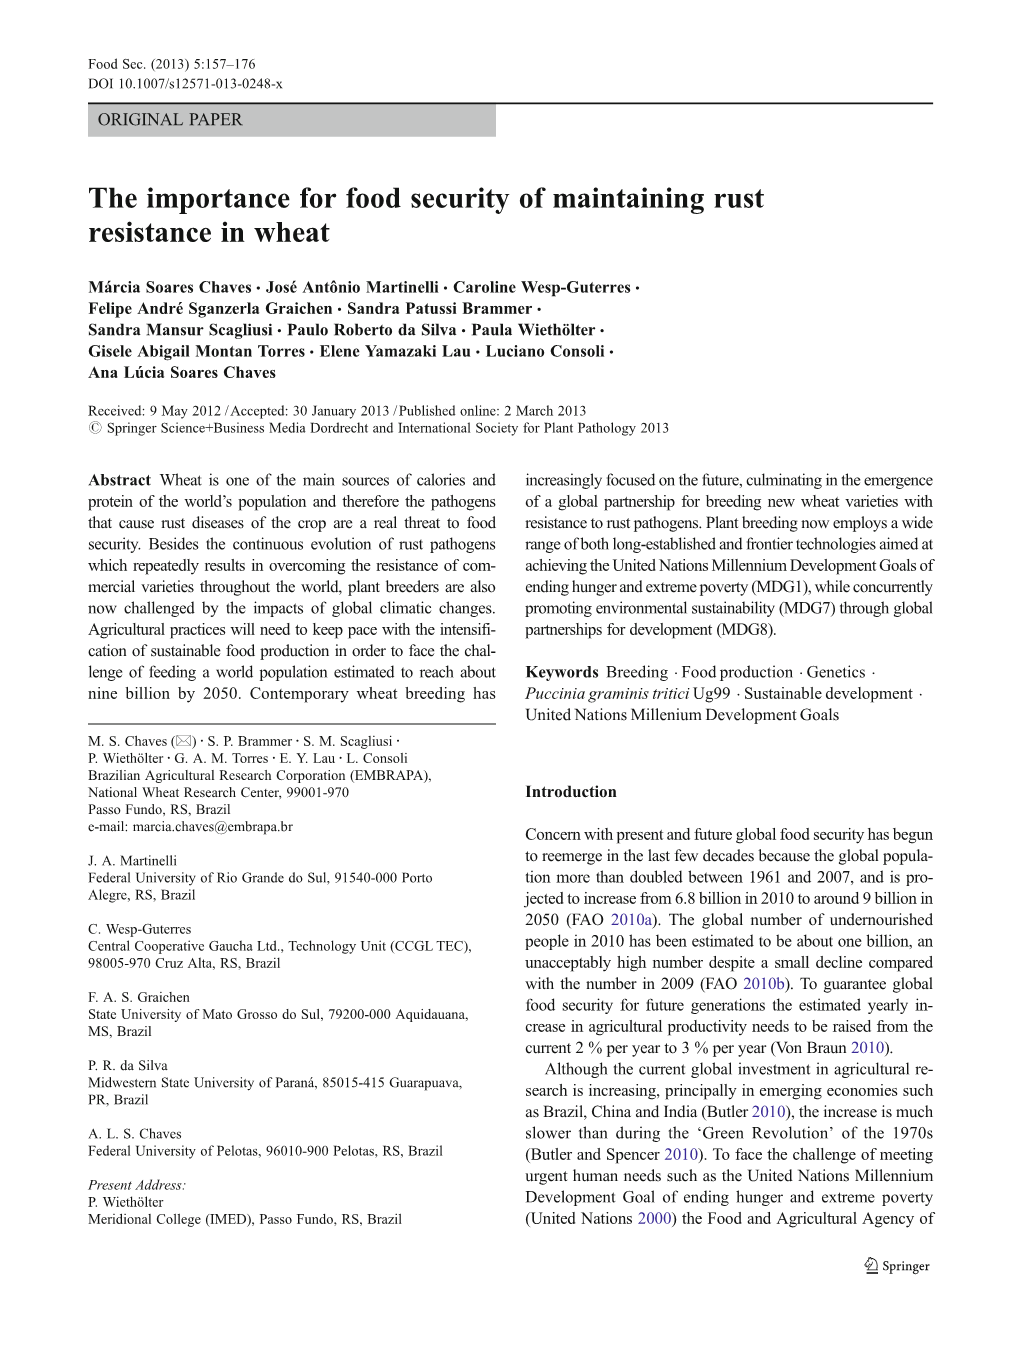 The Importance for Food Security of Maintaining Rust Resistance in Wheat